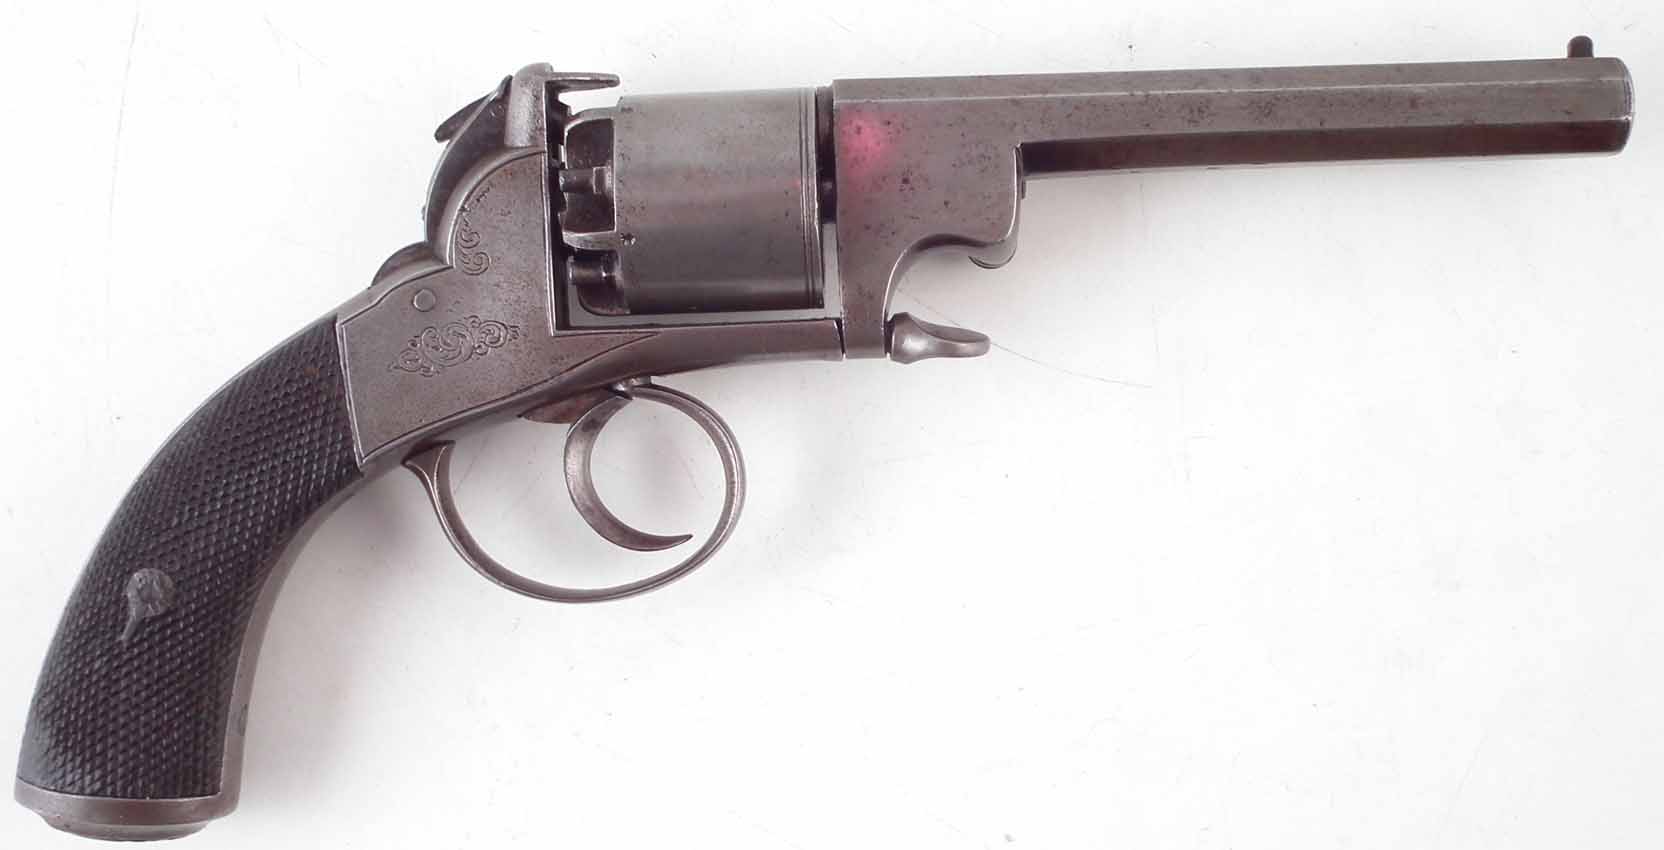 Webley / Bentley 80 bore percussion revolver, with engraved frame, five shot cylinder, circa 1860, - Image 2 of 5